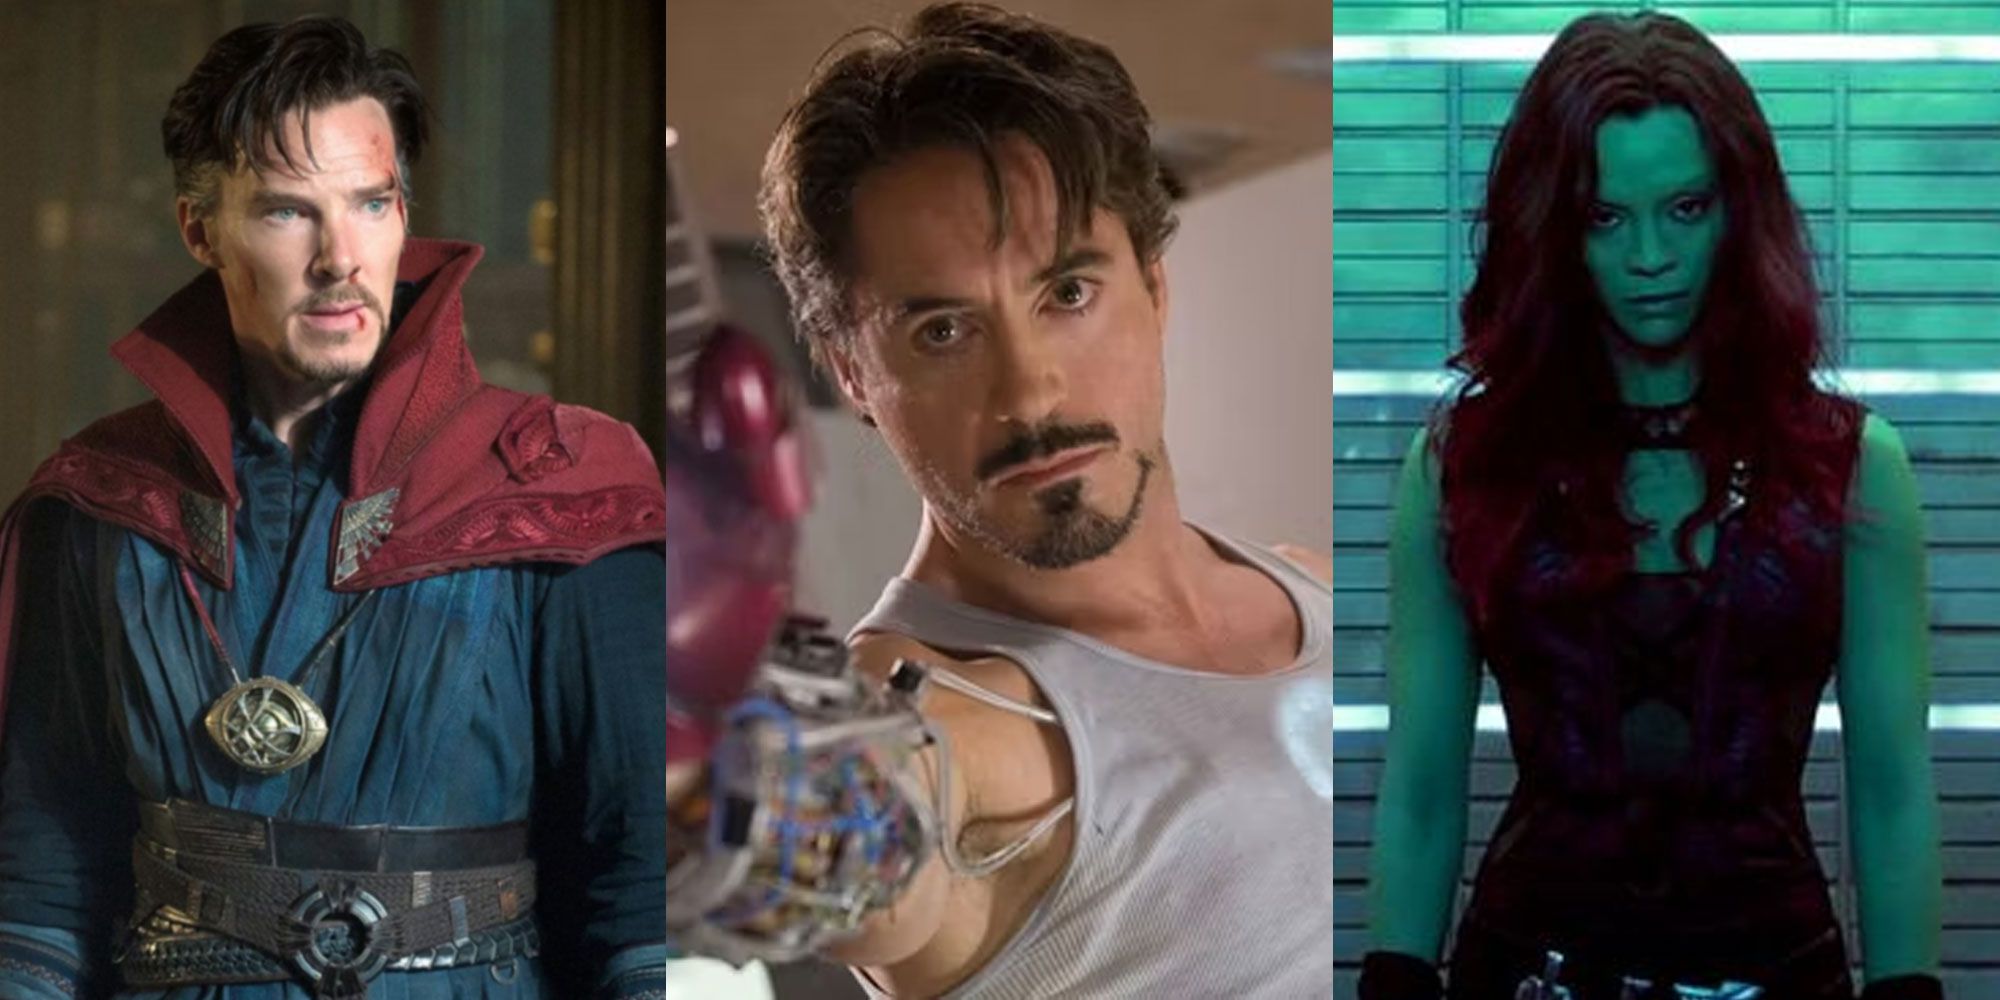 A split image features Marvel Cinematic Universe characters Doctor Strange, Iron Man, and Gamora